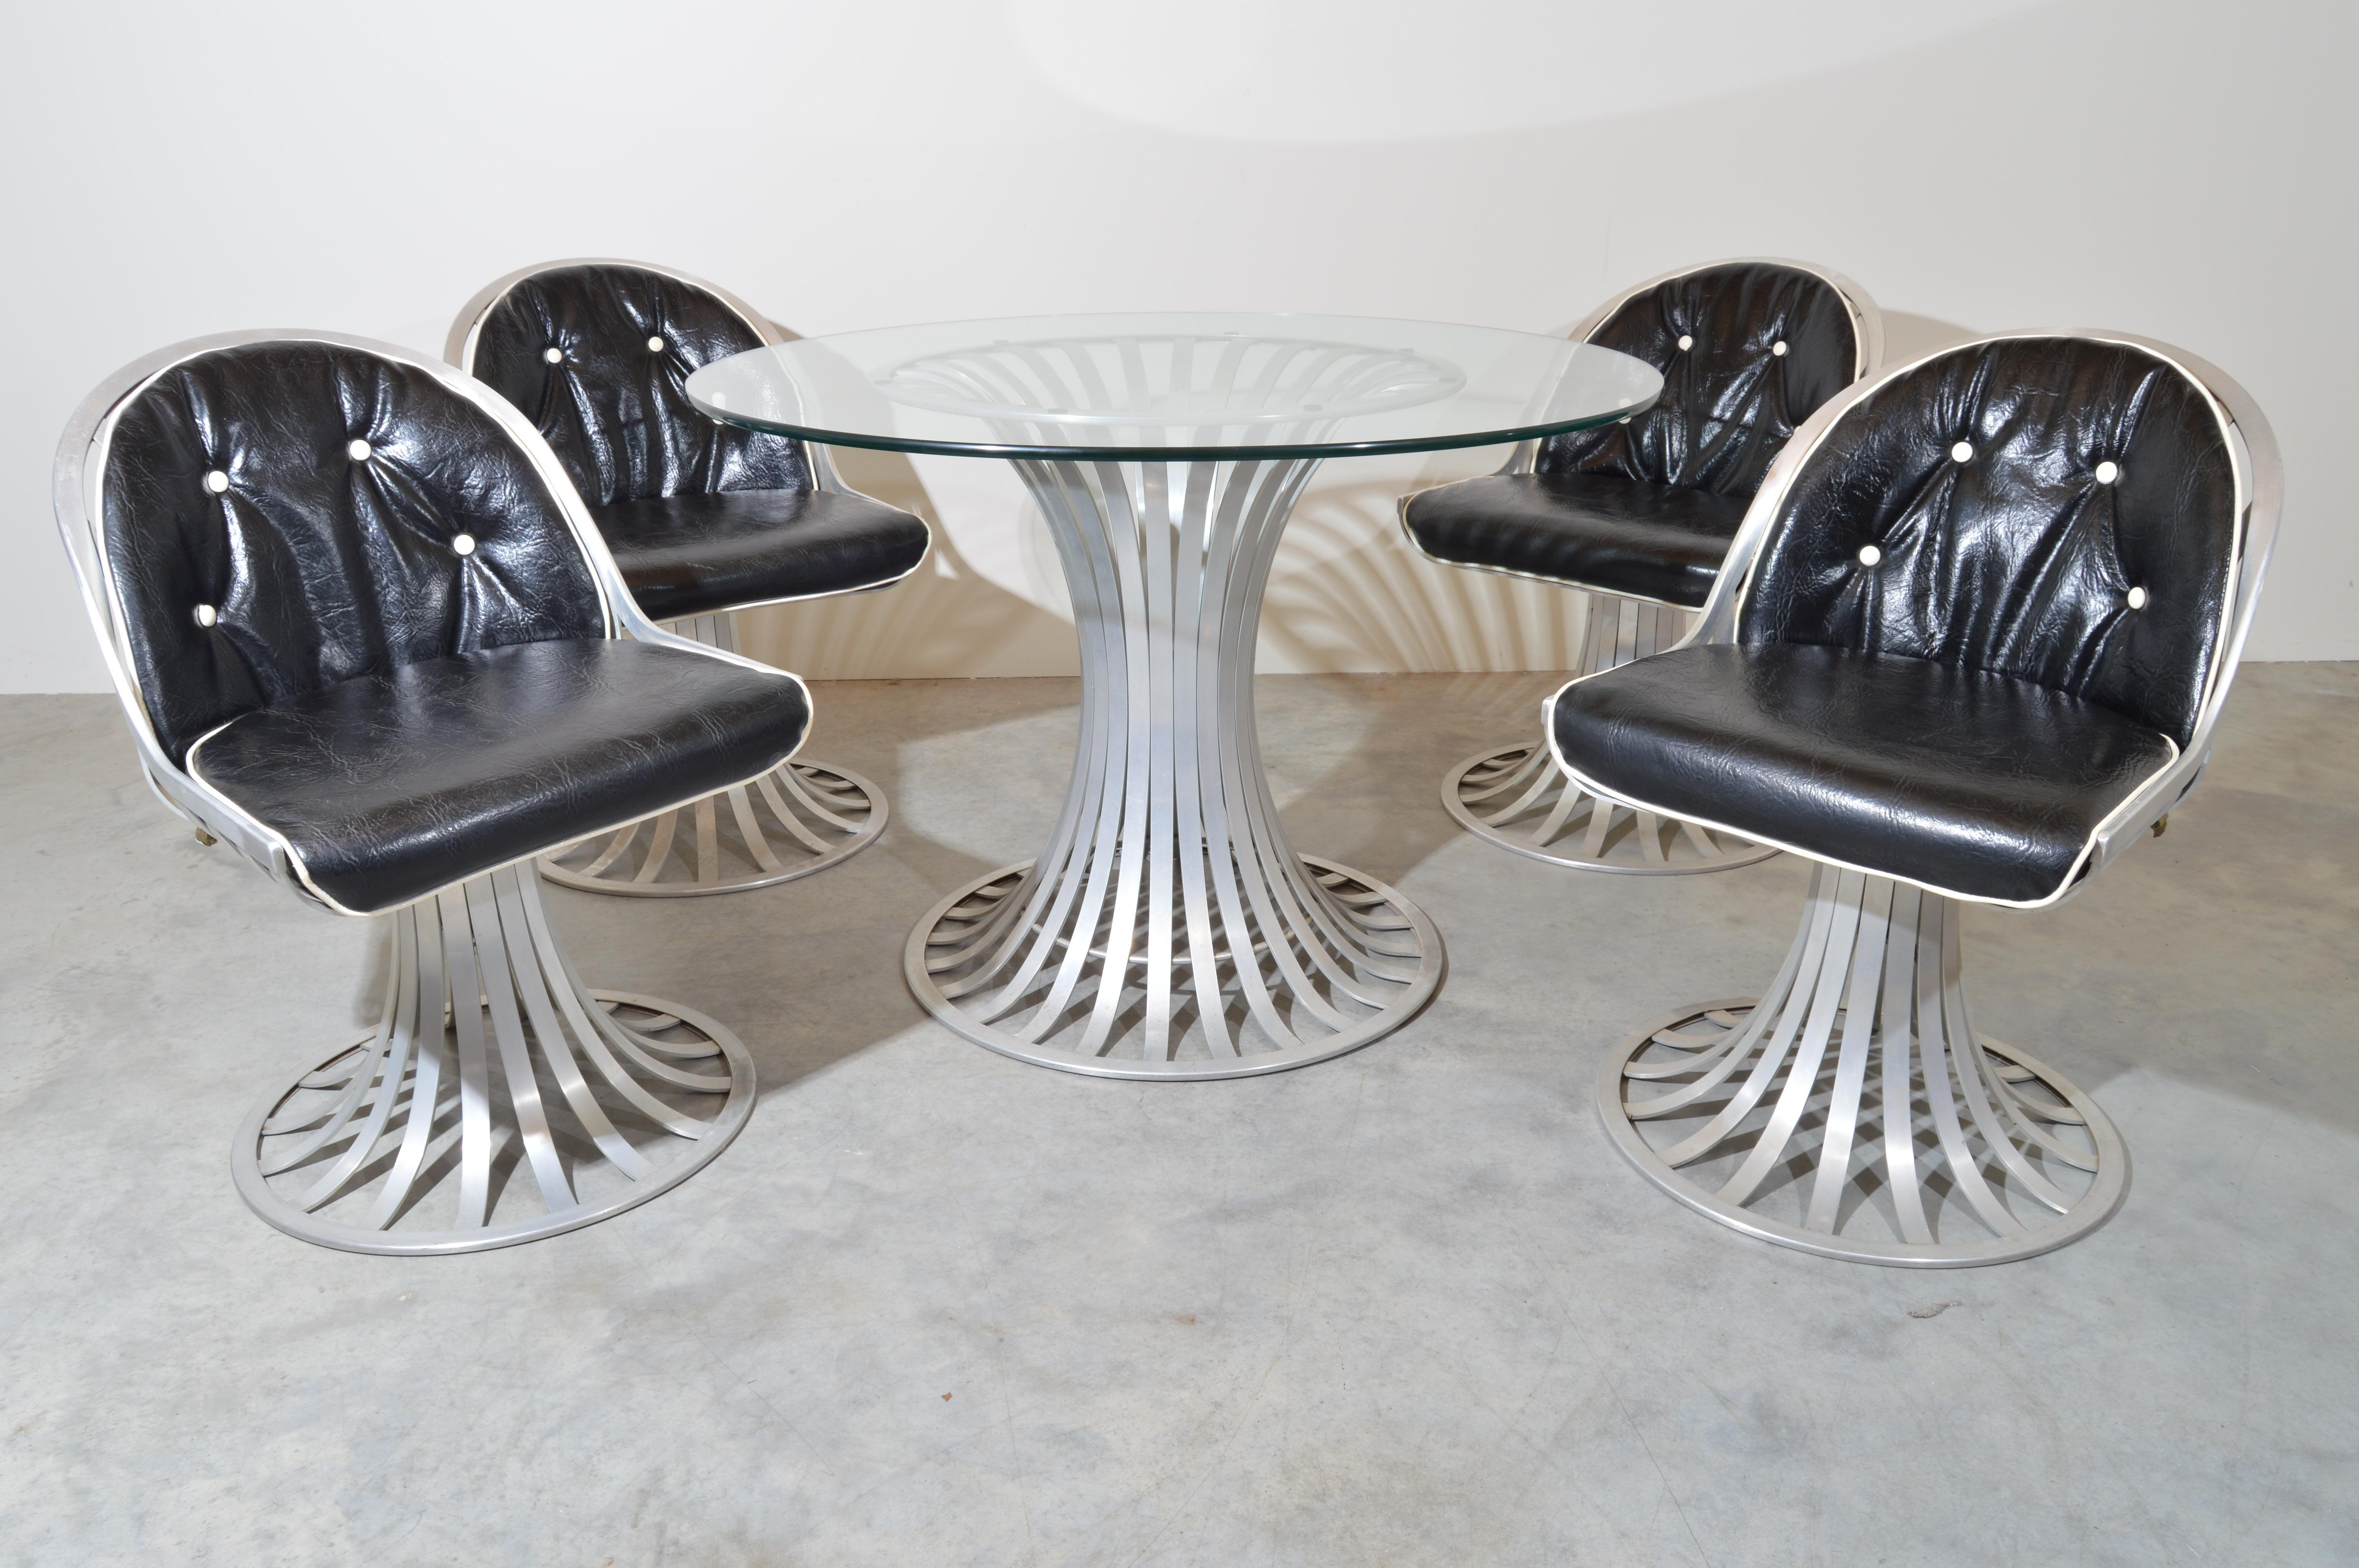 Mid-century sculptural aluminum dinette set having clear round glass top and vinyl seats designed by Russell Woodard for Lee L. Woodard & Sons. The table measures 28.5 x 42” height & diameter. 
The chairs are 31 x 21.25 x 25” HWD SH 18”
The set is